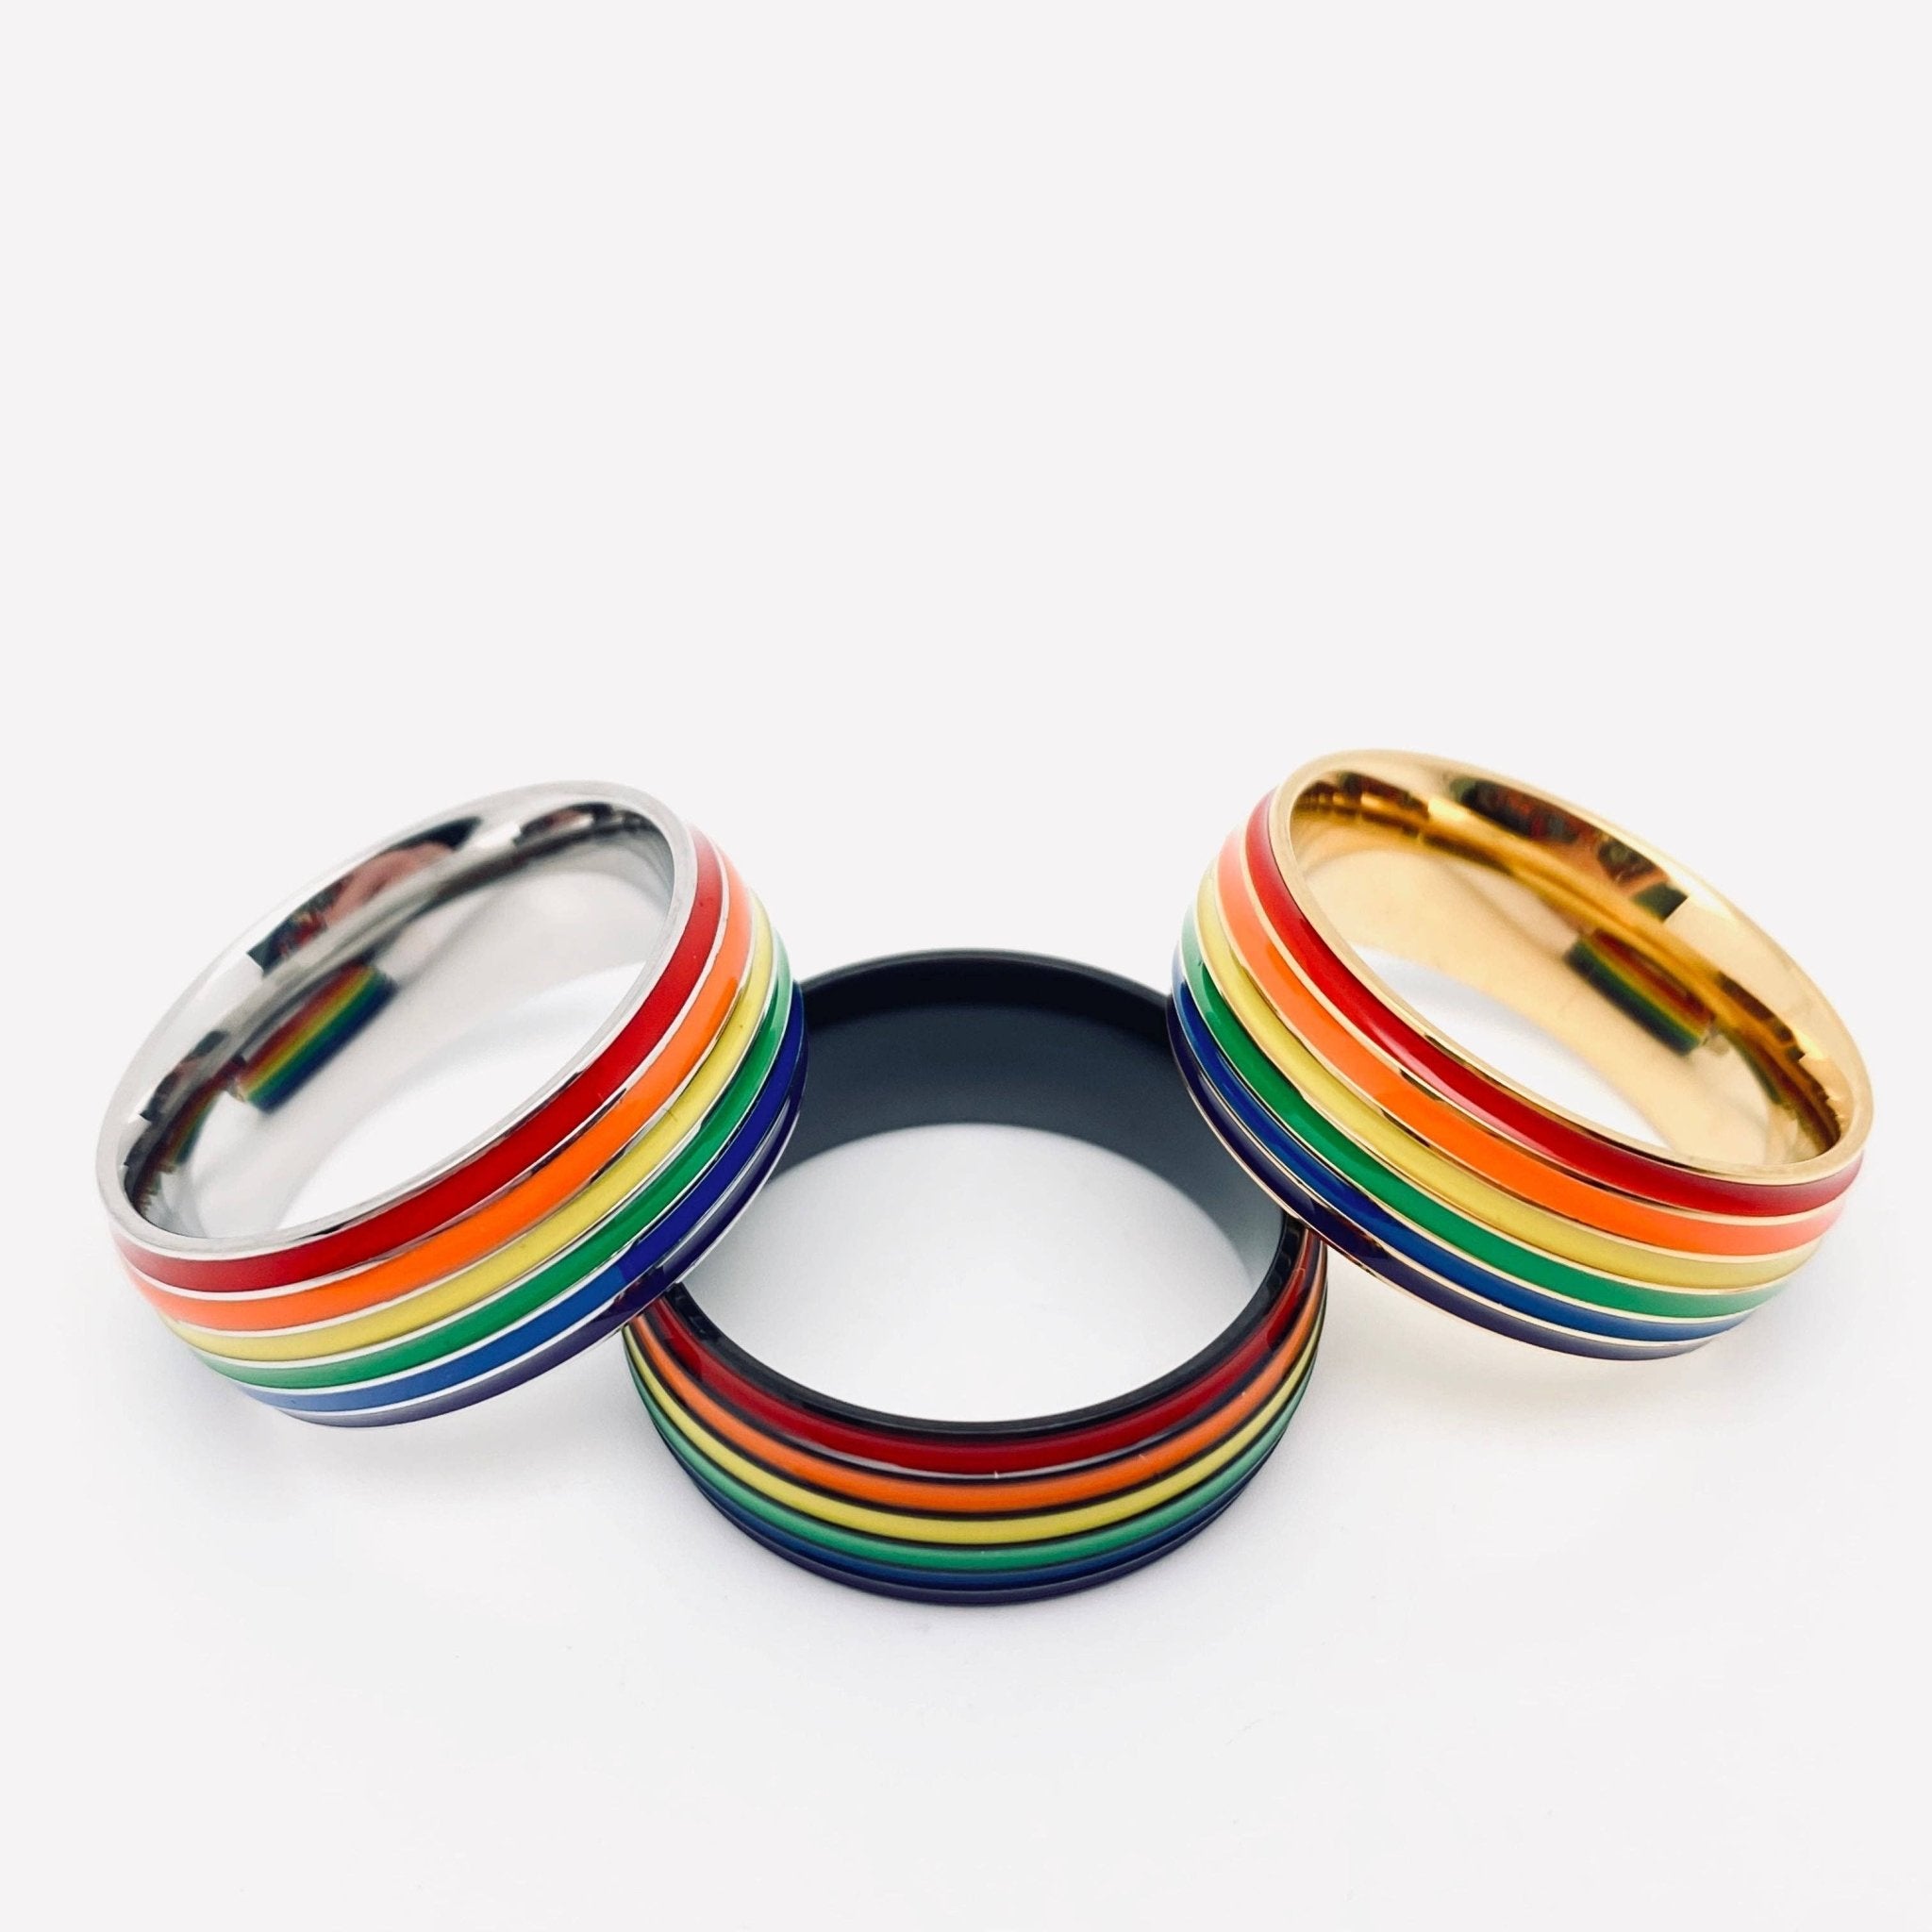 Rainbow Striped Stainless Steel Ring - Spiral Circle